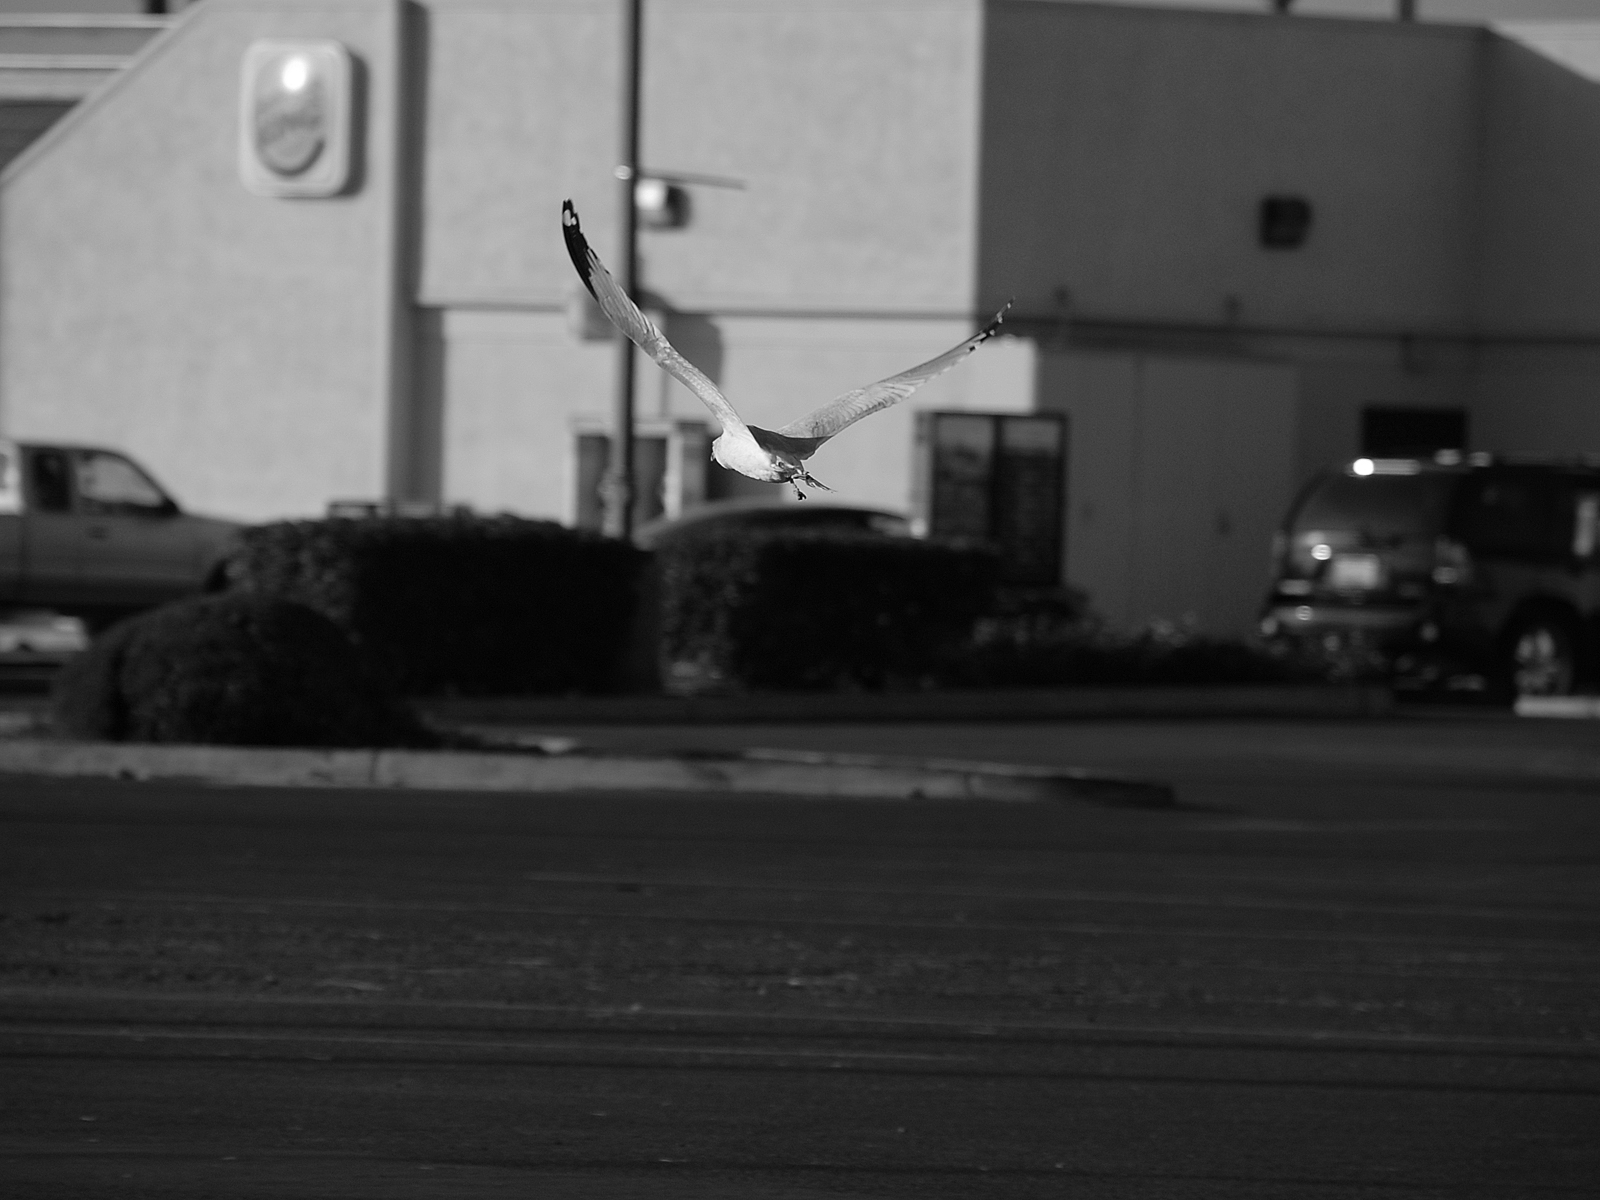 Flying across the parking lot photo